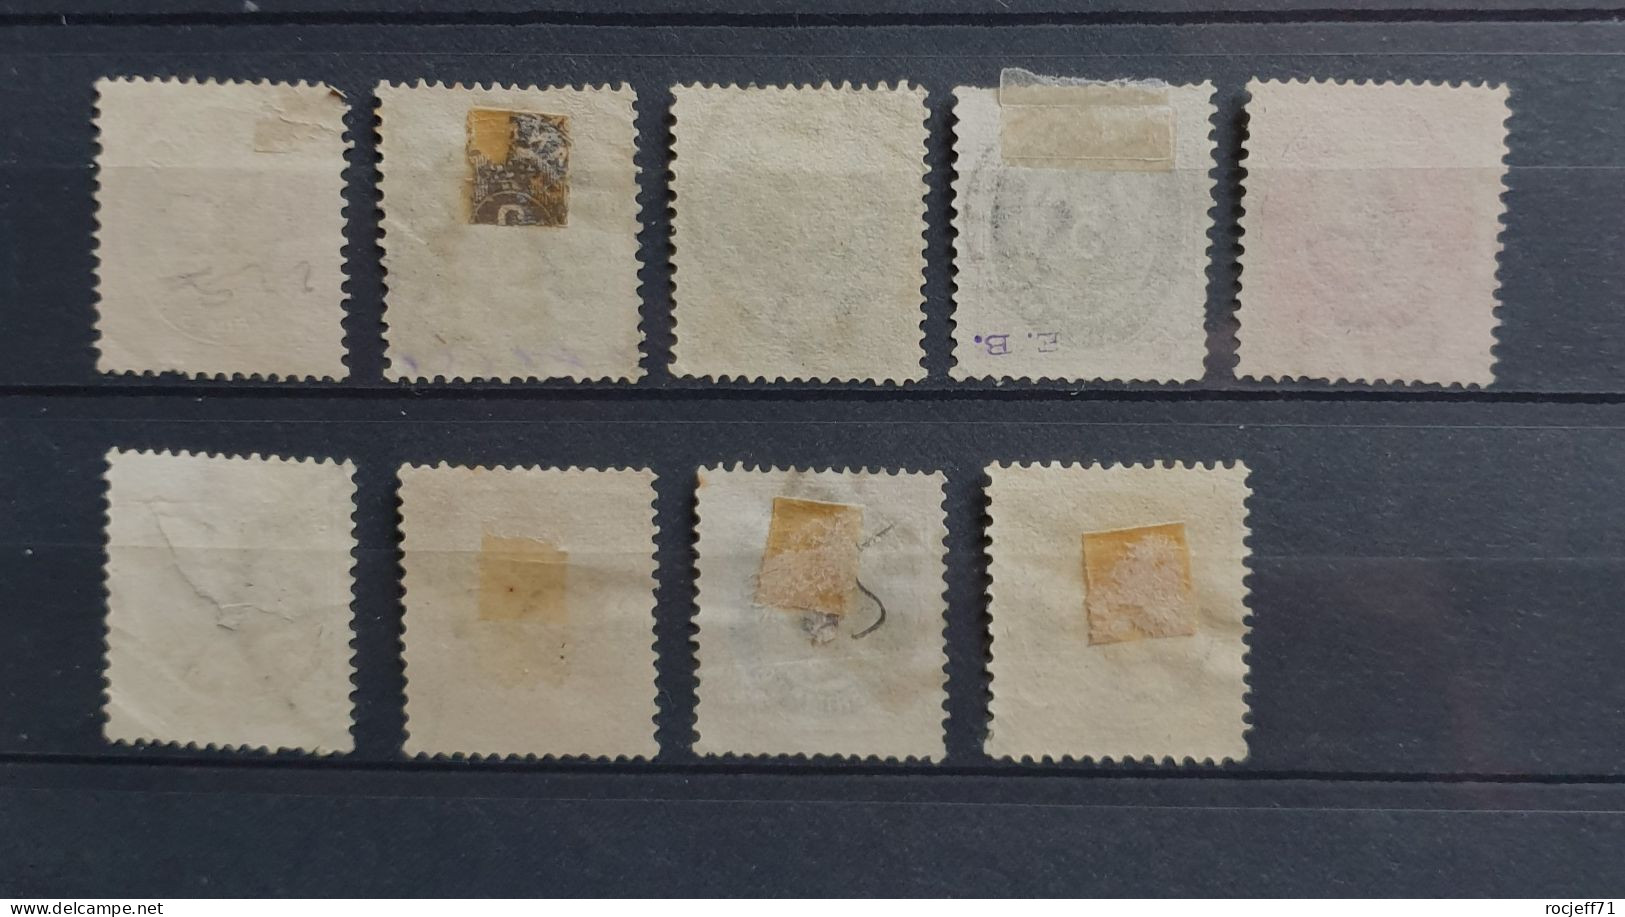 05 - 24 - Gino - Danemark - Lot De Vieux Timbres - Old Stamps  - Value : 200 Euros - Used Stamps